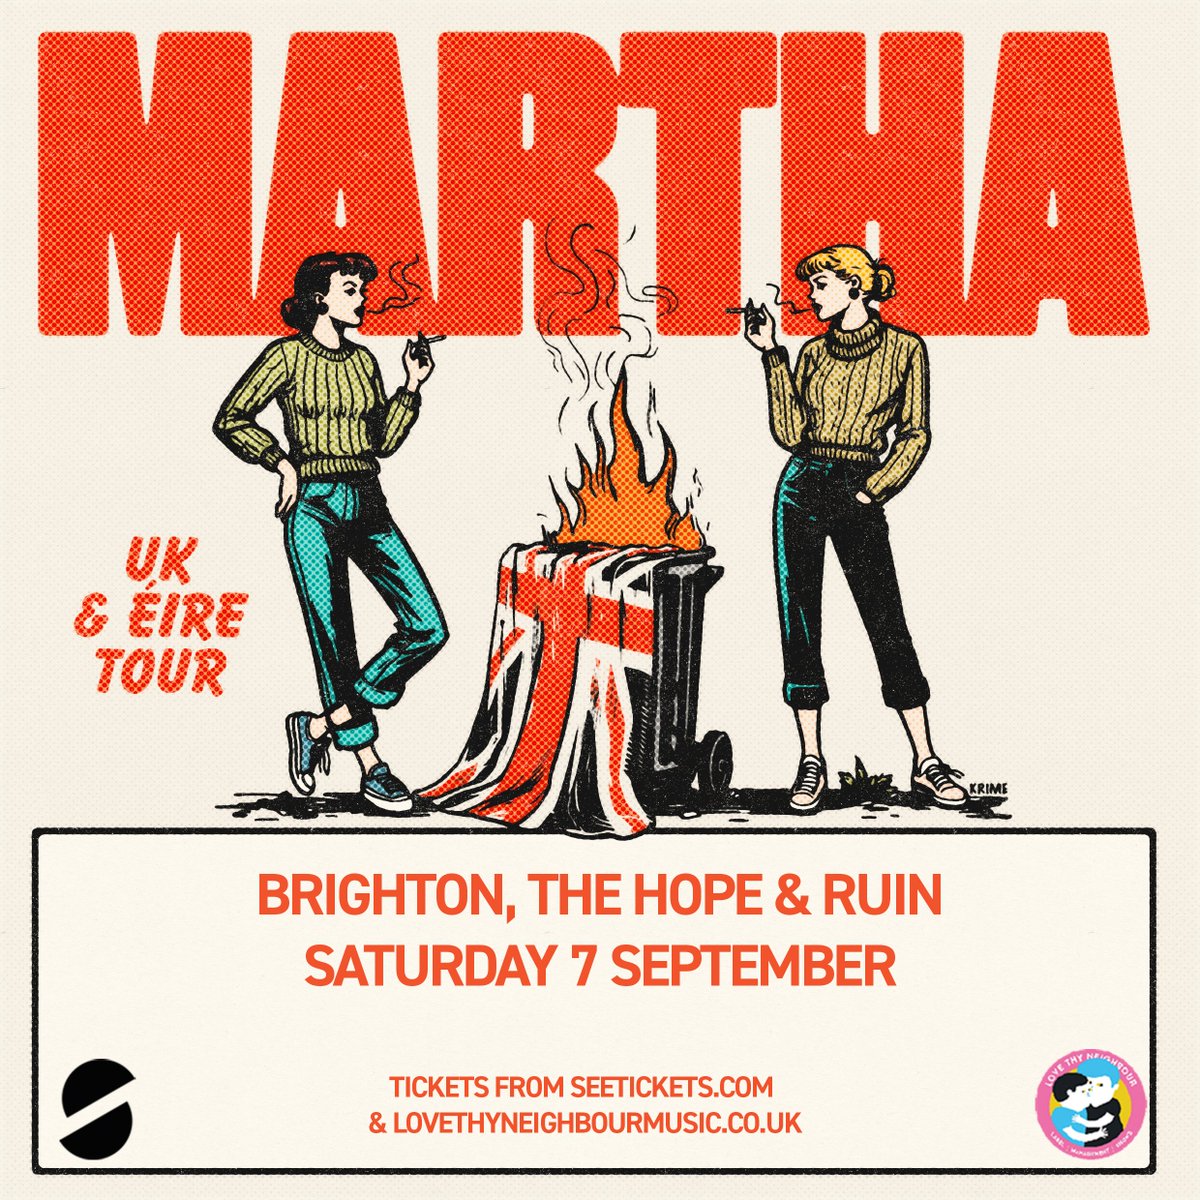 💽Onsale now! 💽 Durham DIY pop band @MarthaDIY play an intimate Brighton show! 🎫 @seetickets + our website 🏛 @thehopeandruin 📆 Saturday 7th September